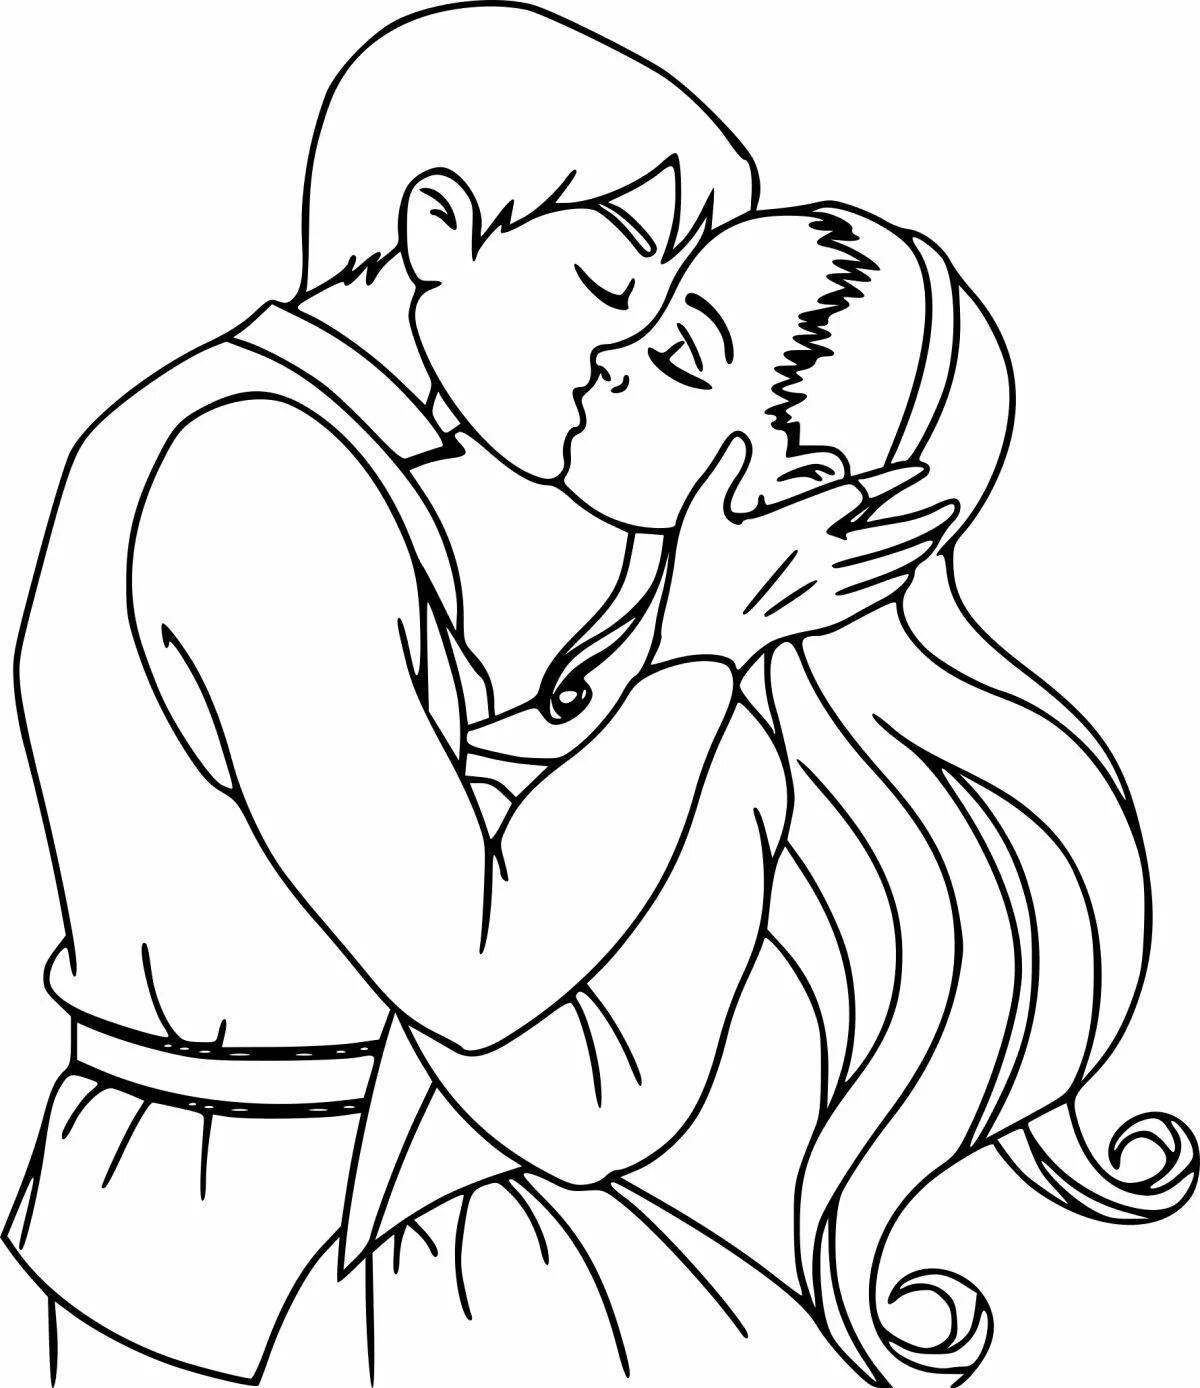 Adorable couple coloring pages